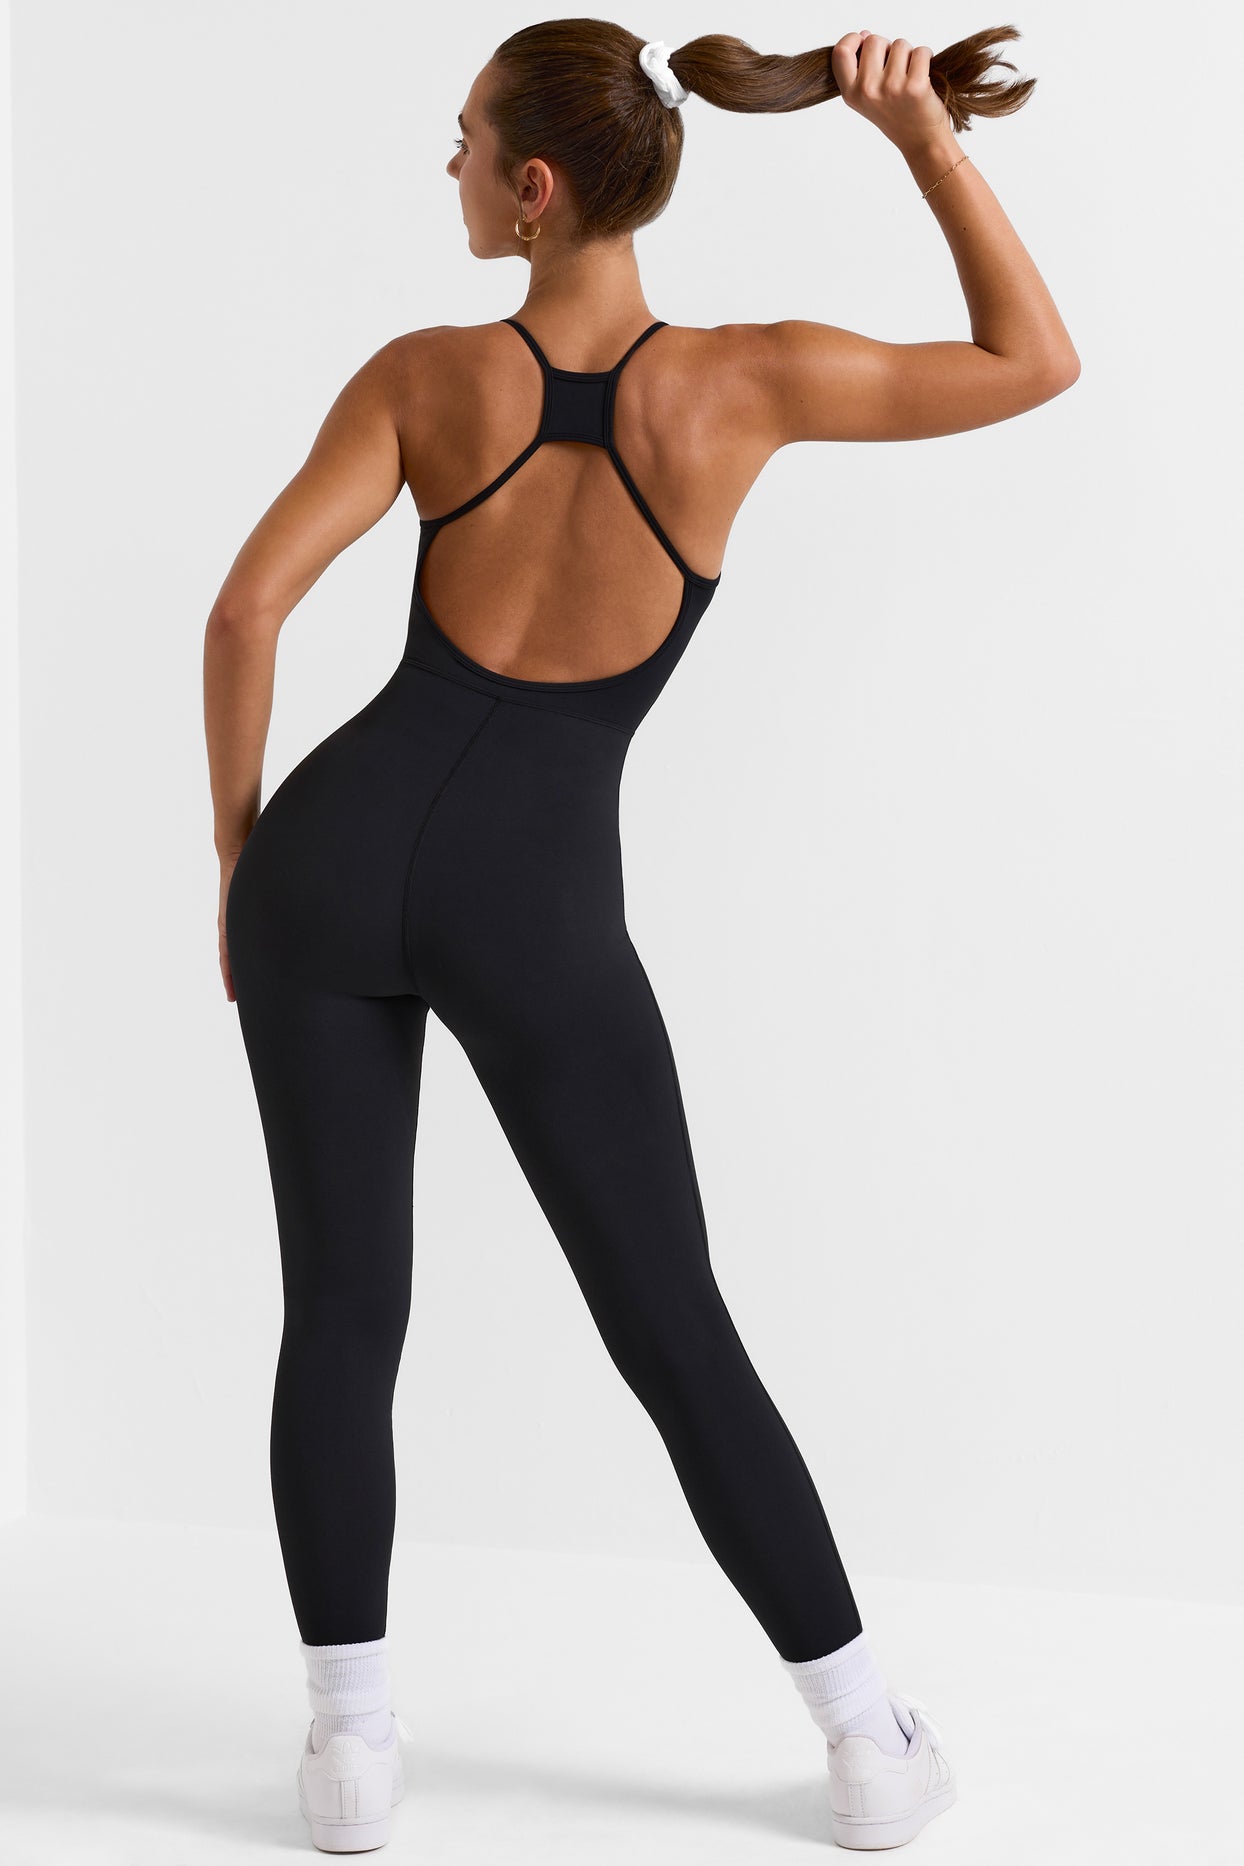 Women Jumpsuit Black Athleisure Strappy Unitard Playsuit for Yoga Gym and  Beyond Women Clothing 